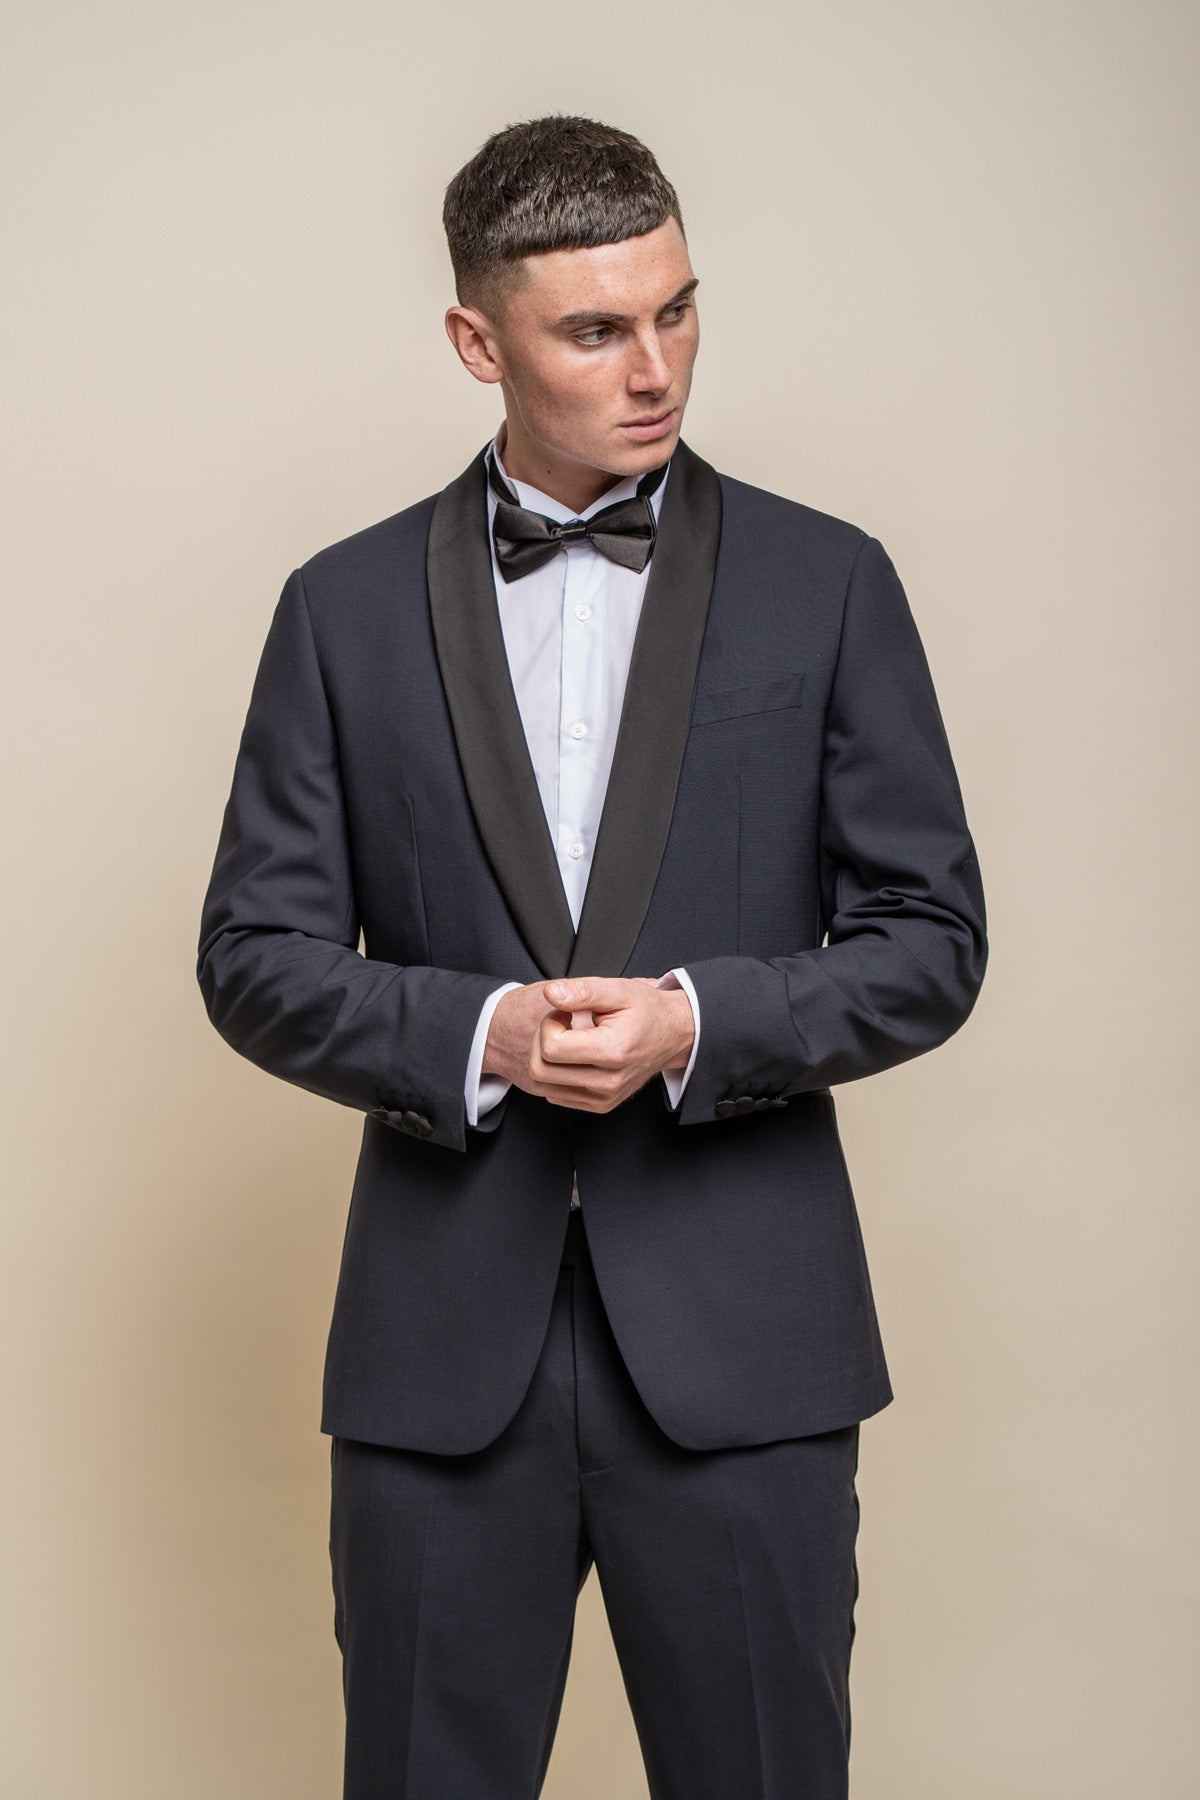 Aspen Midnight Navy Tuxedo Wedding Suit Swatch - Swatch - - Swagger & Swoon